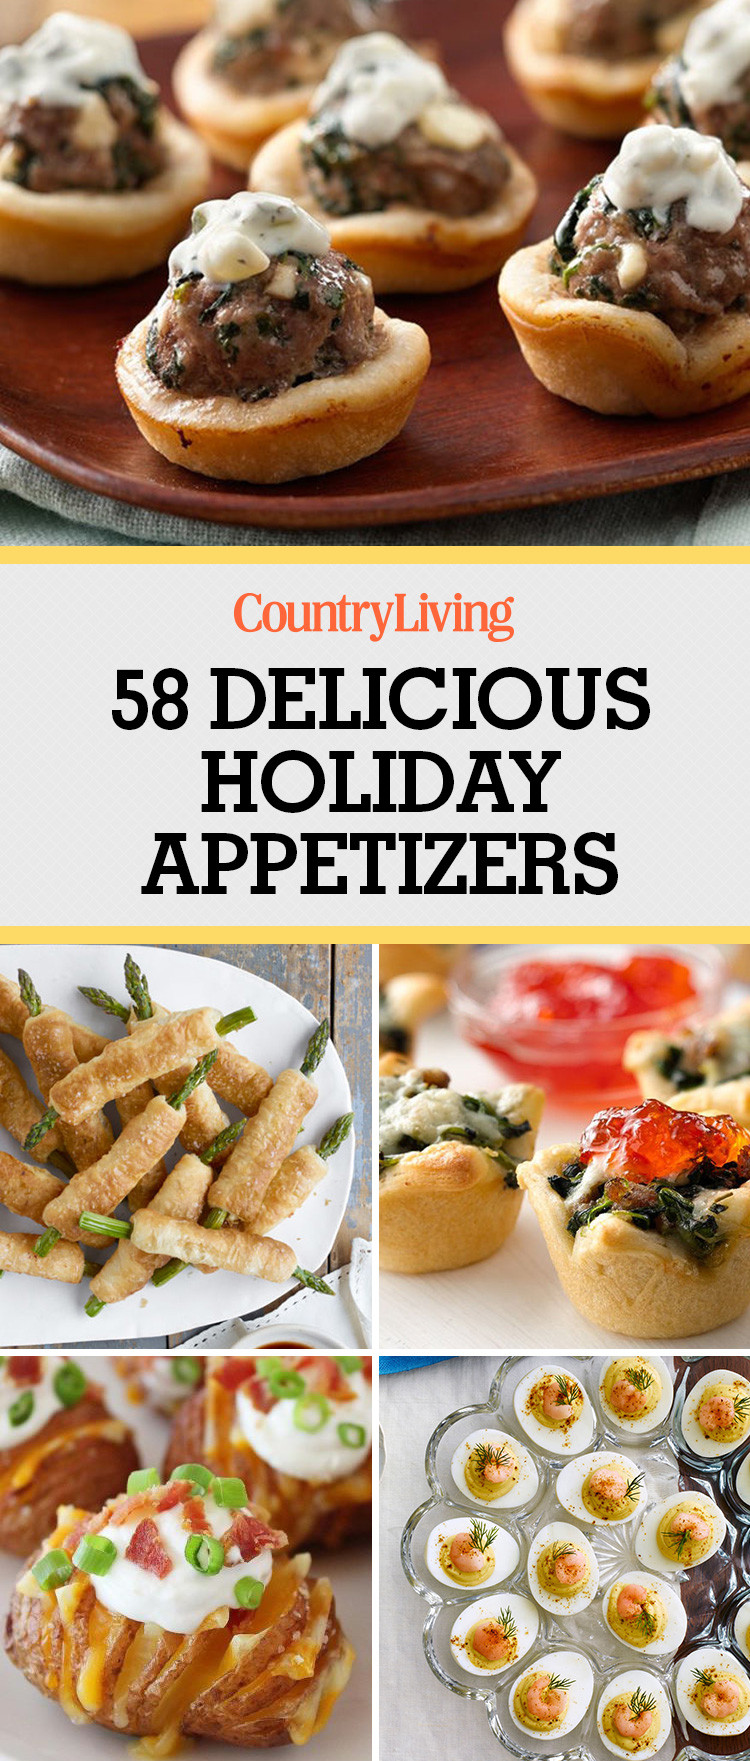 Christmas Appetizers Ideas
 60 Easy Thanksgiving and Christmas Appetizer Recipes